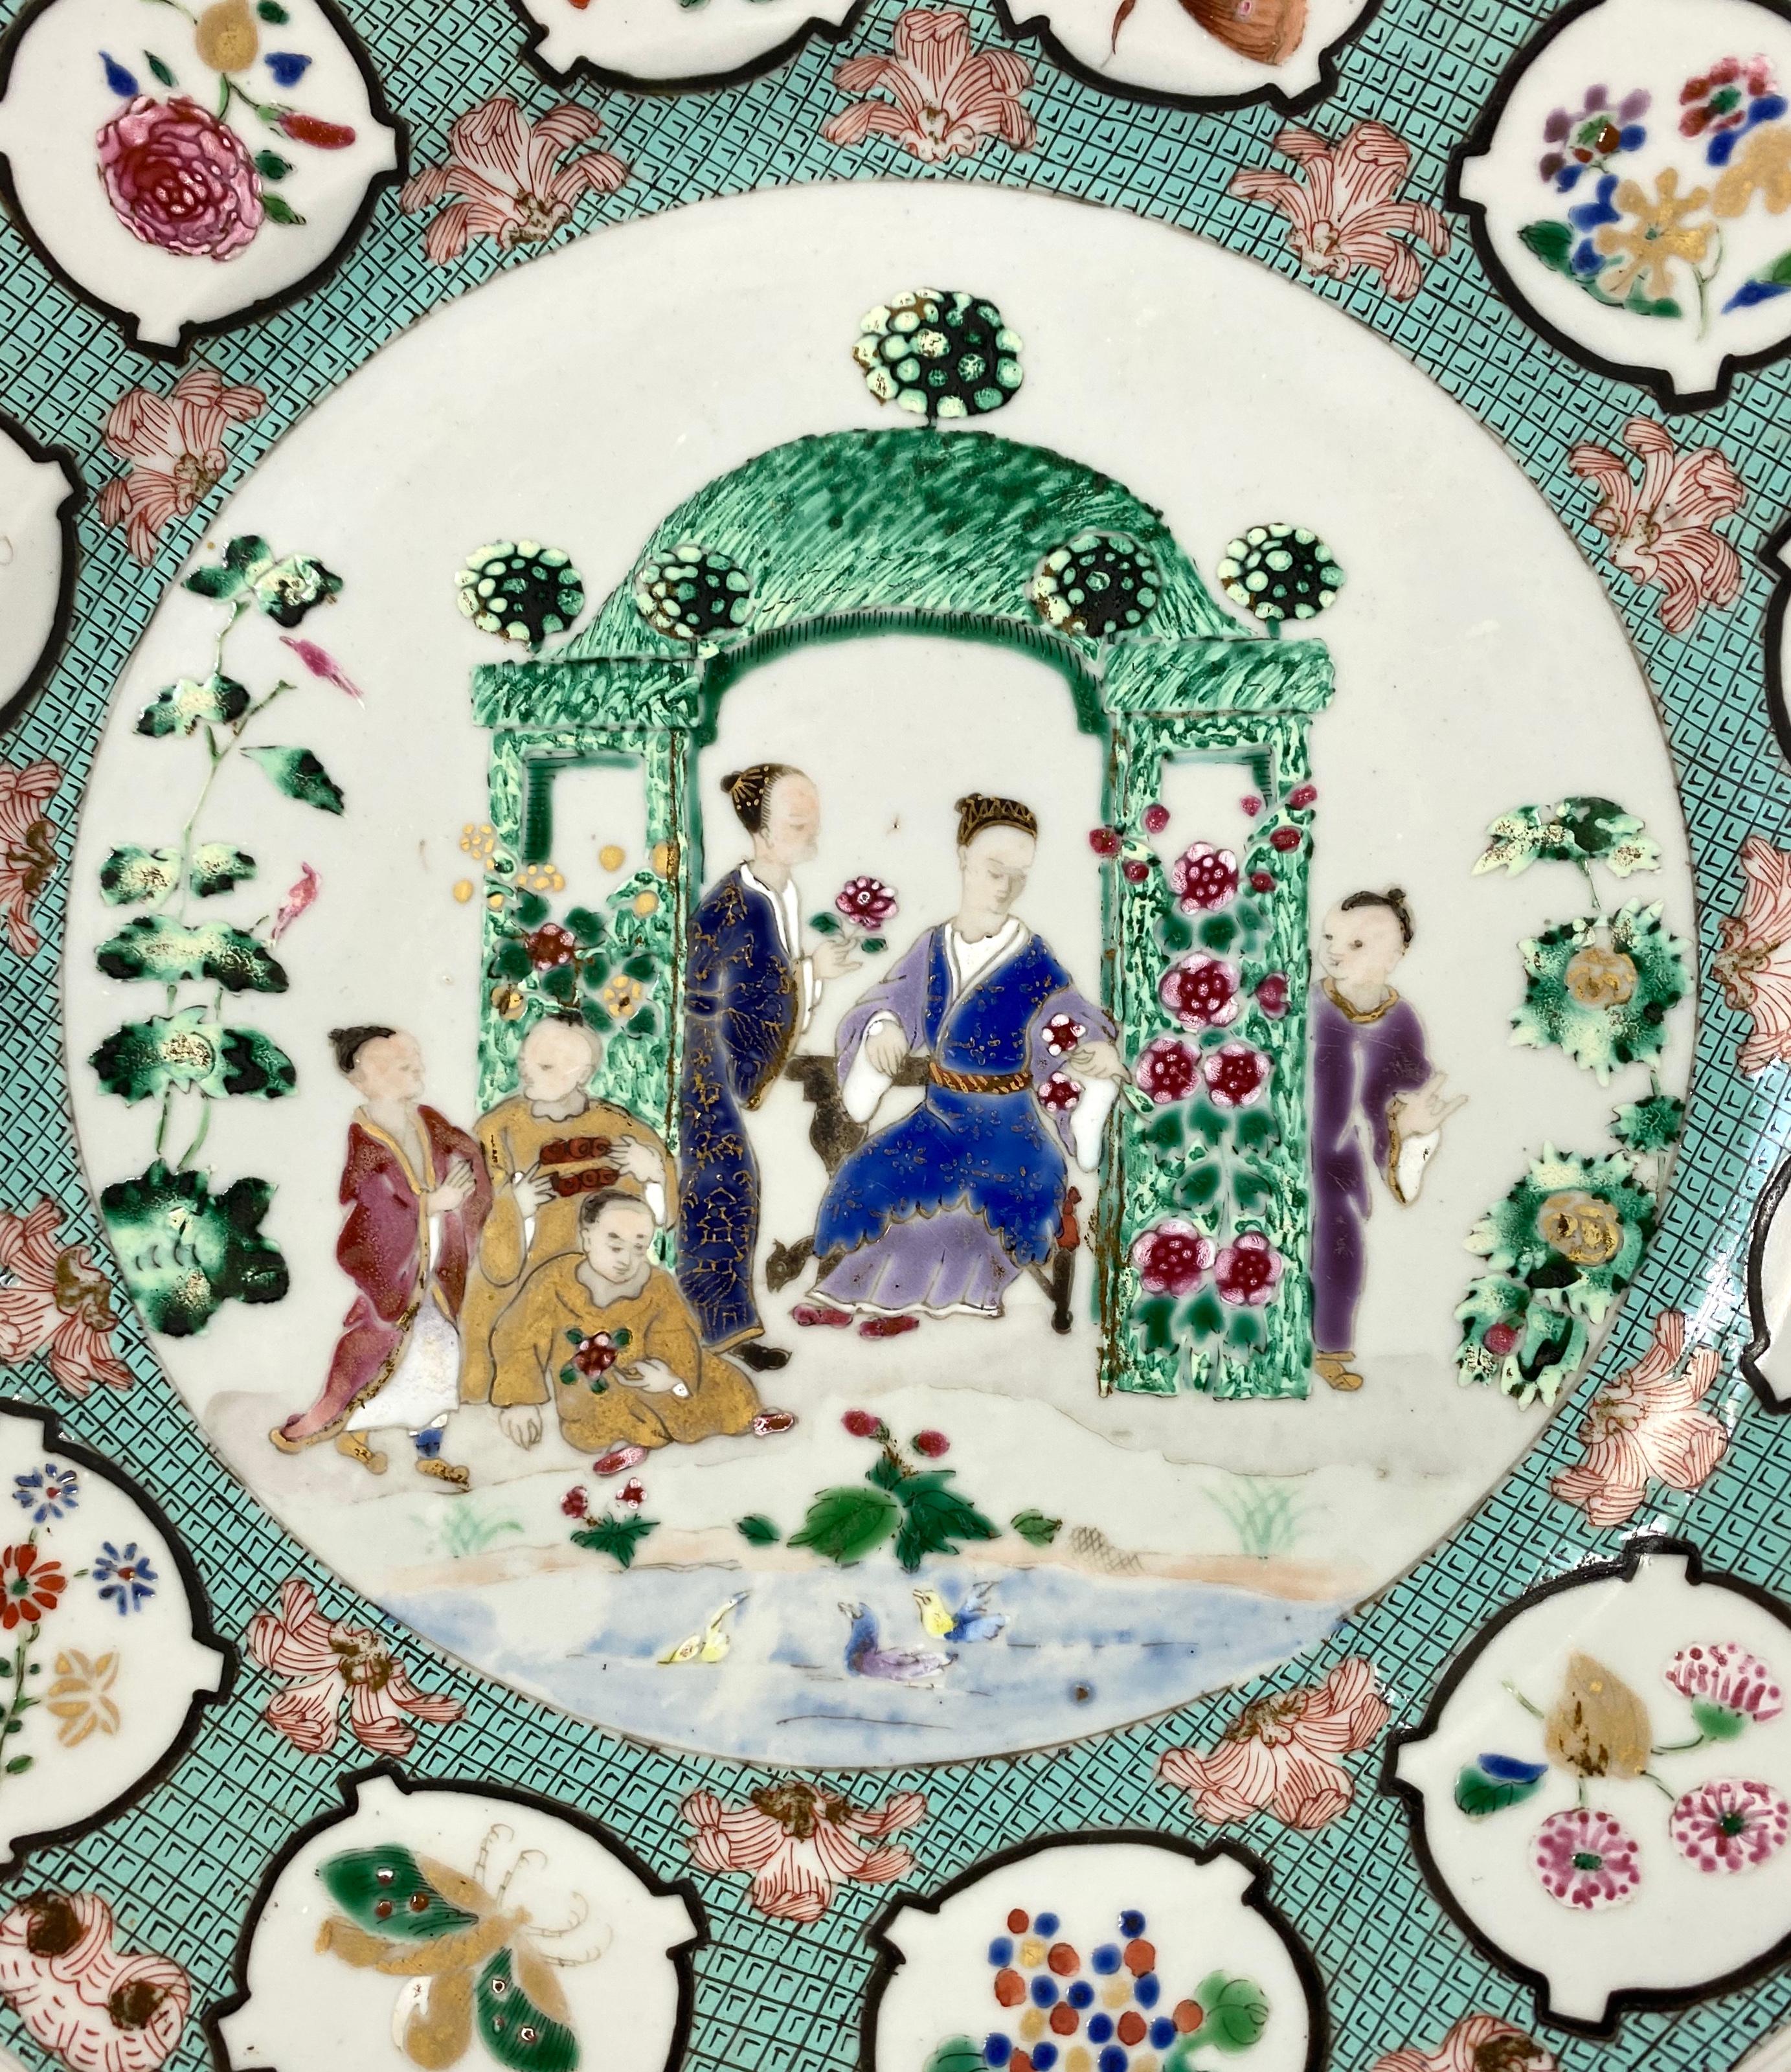 Chinese porcelain plate, circa 1738, Qianlong Period. Hand painted in fencai enamels, with the ‘Arbor’ pattern, after a design by Dutch artist Cornelis Pronk.
The central panel with figures within a topiary garden scene, watching ducks on a river.